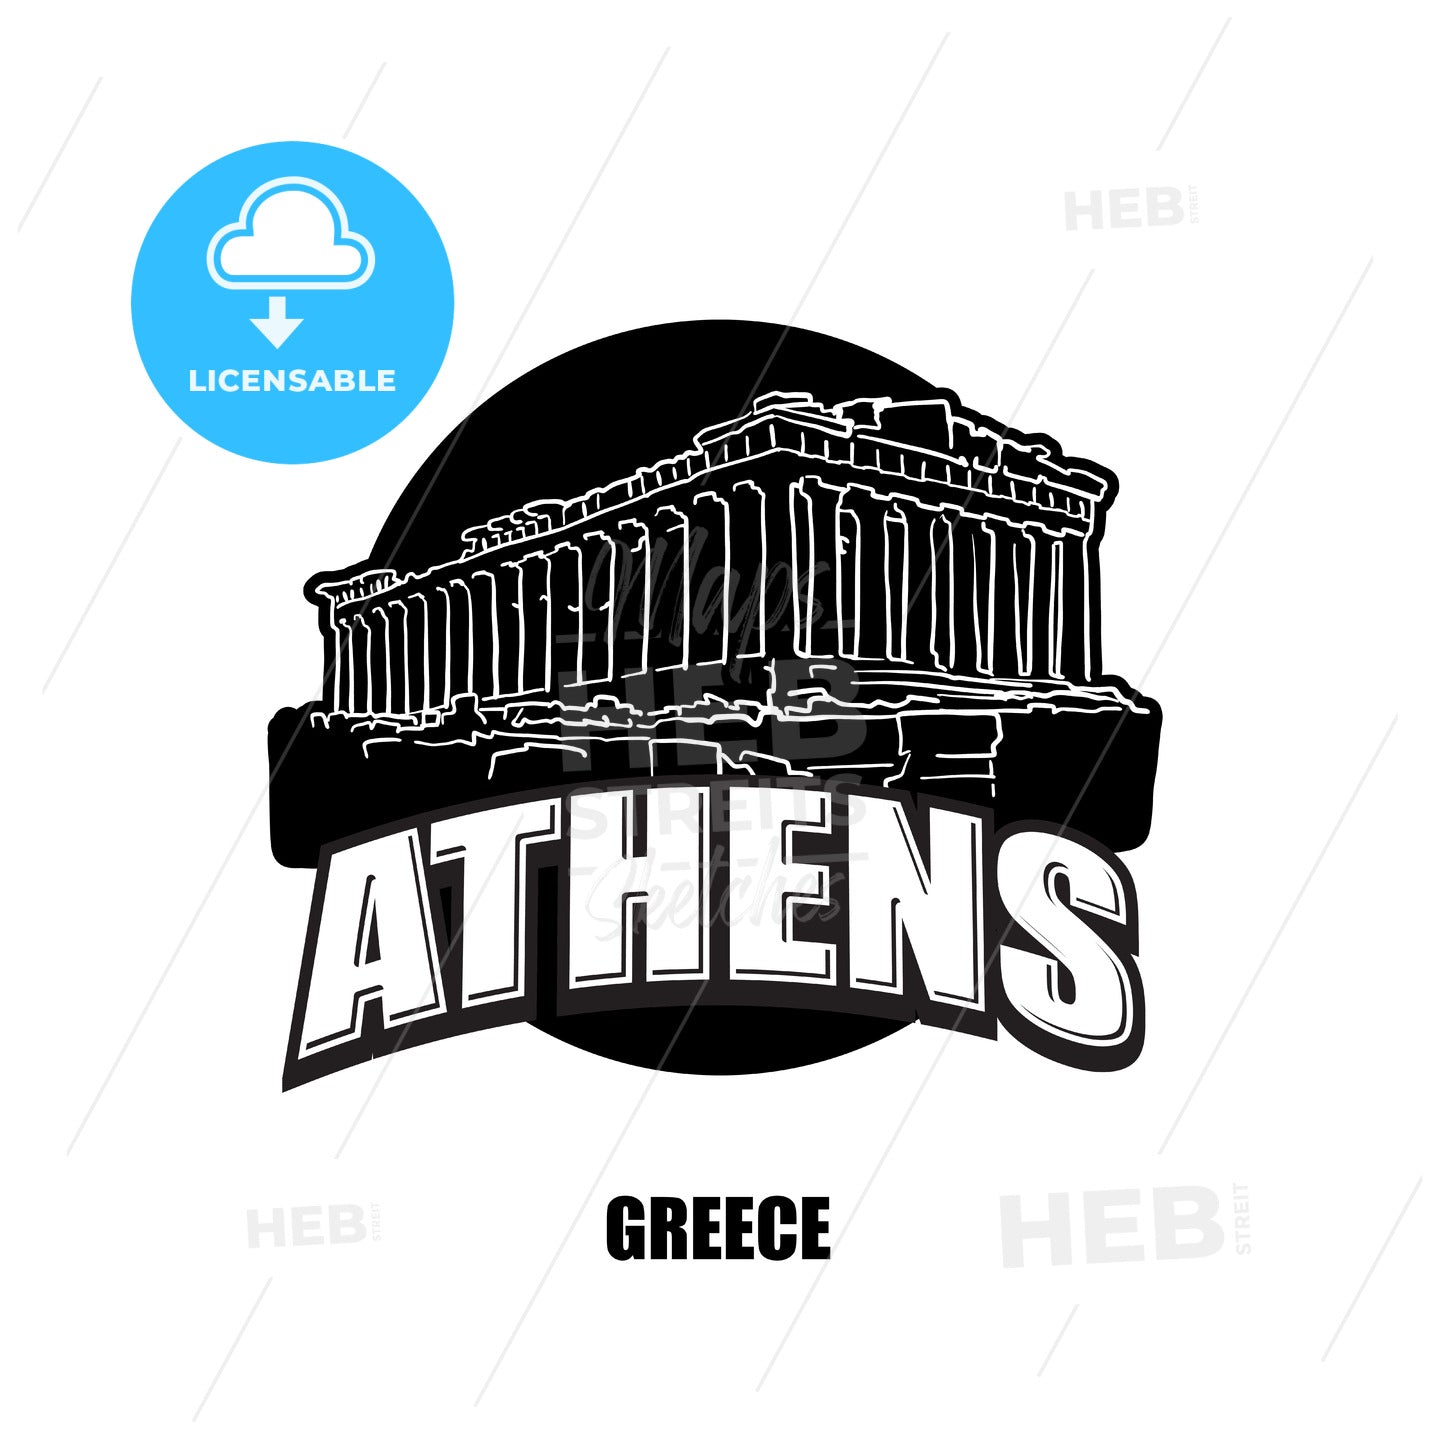 Athens, temple, black and white logo – instant download